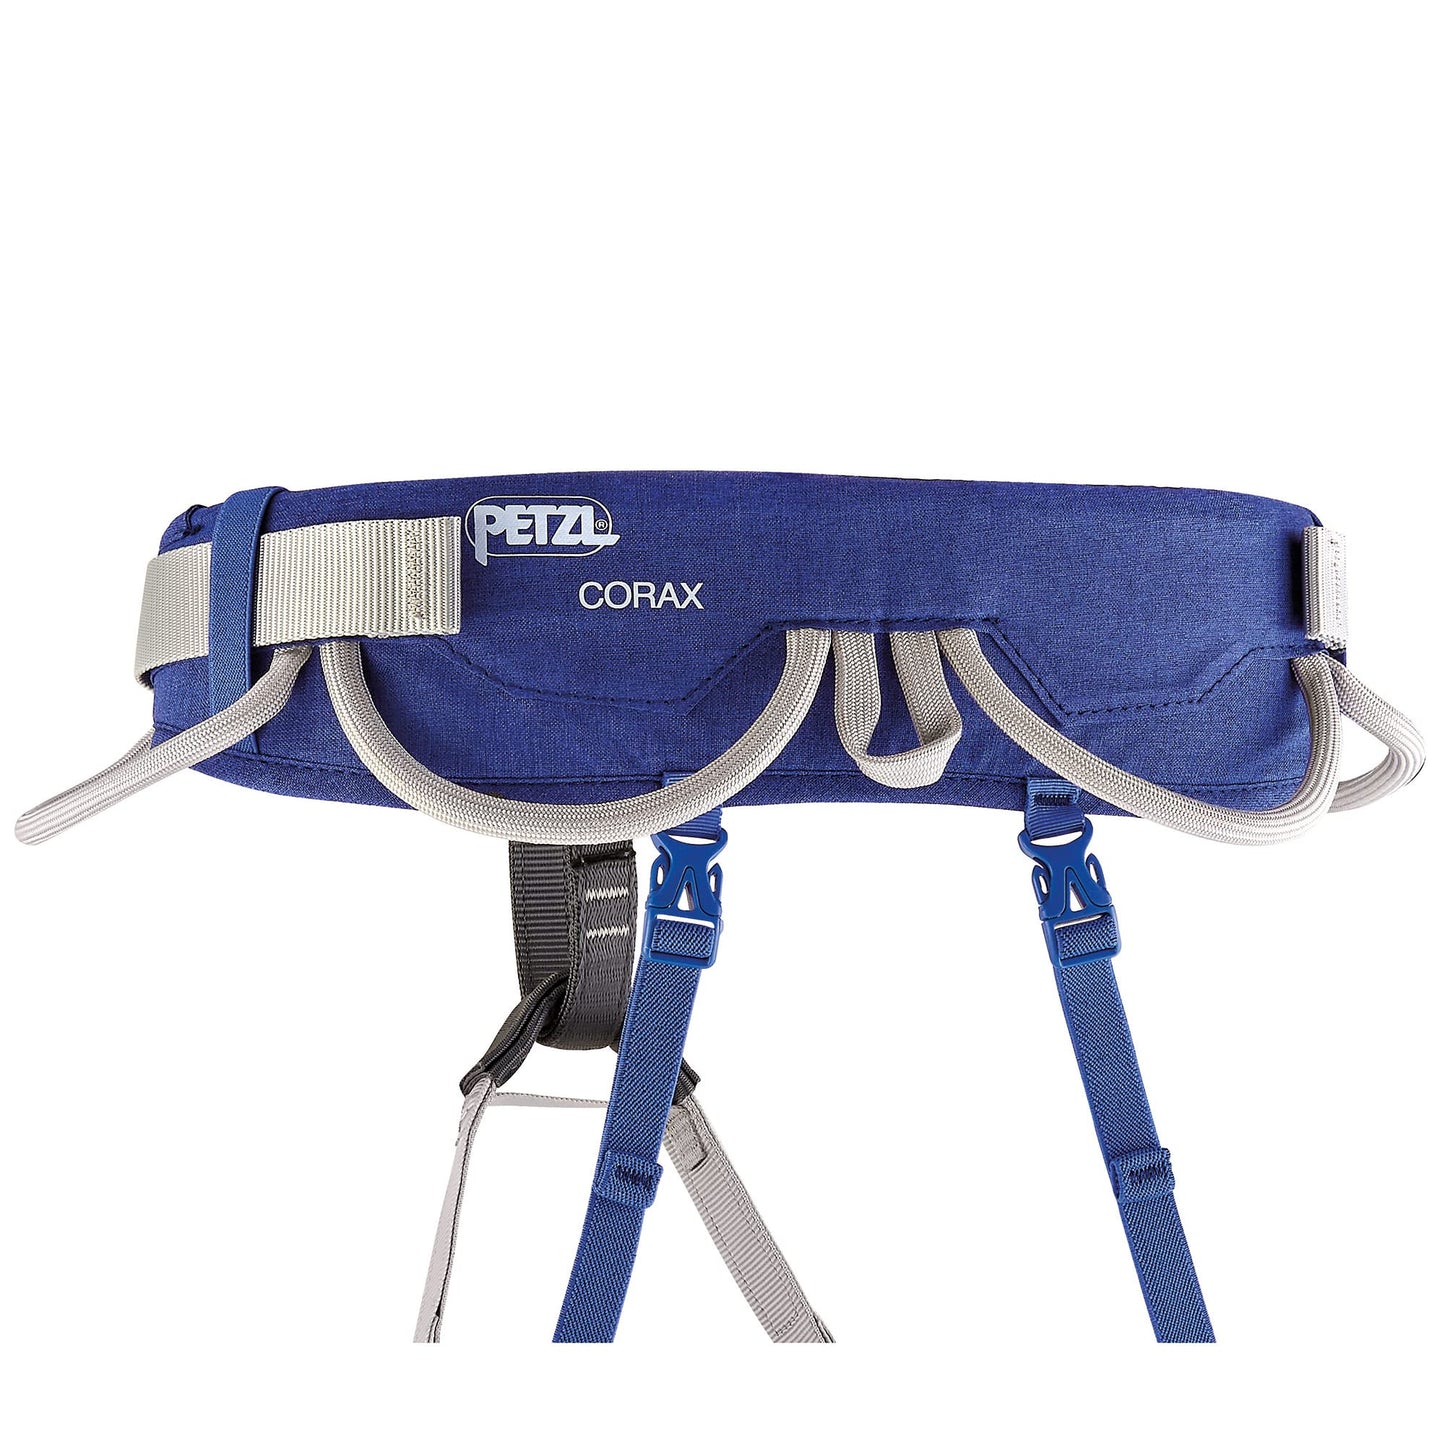 PETZL, Corax, Harness For Climbing And Mountaineering Multipurpose, Blue, 1, Unisex-Adult